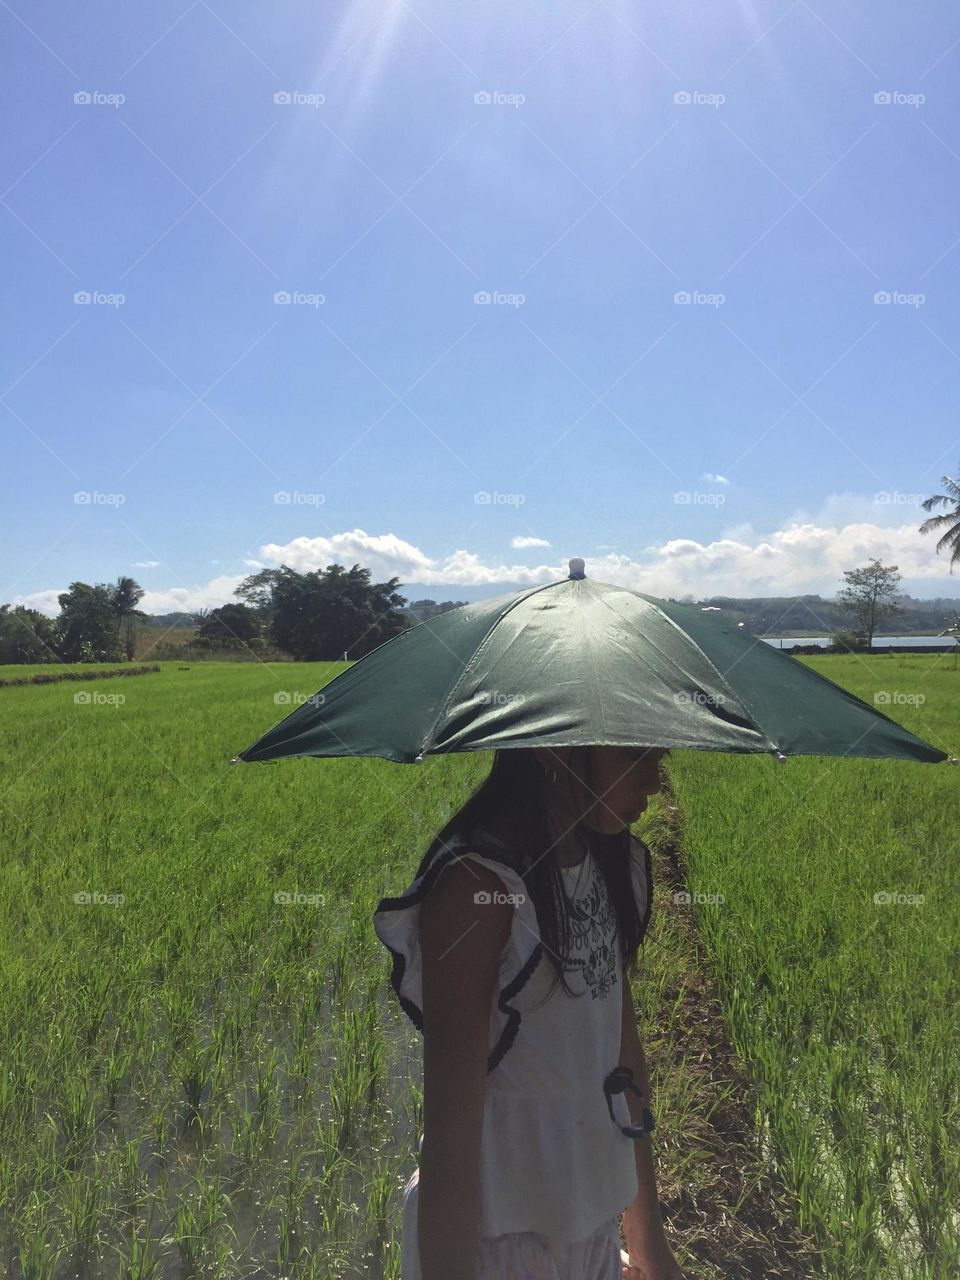 At the rice field 